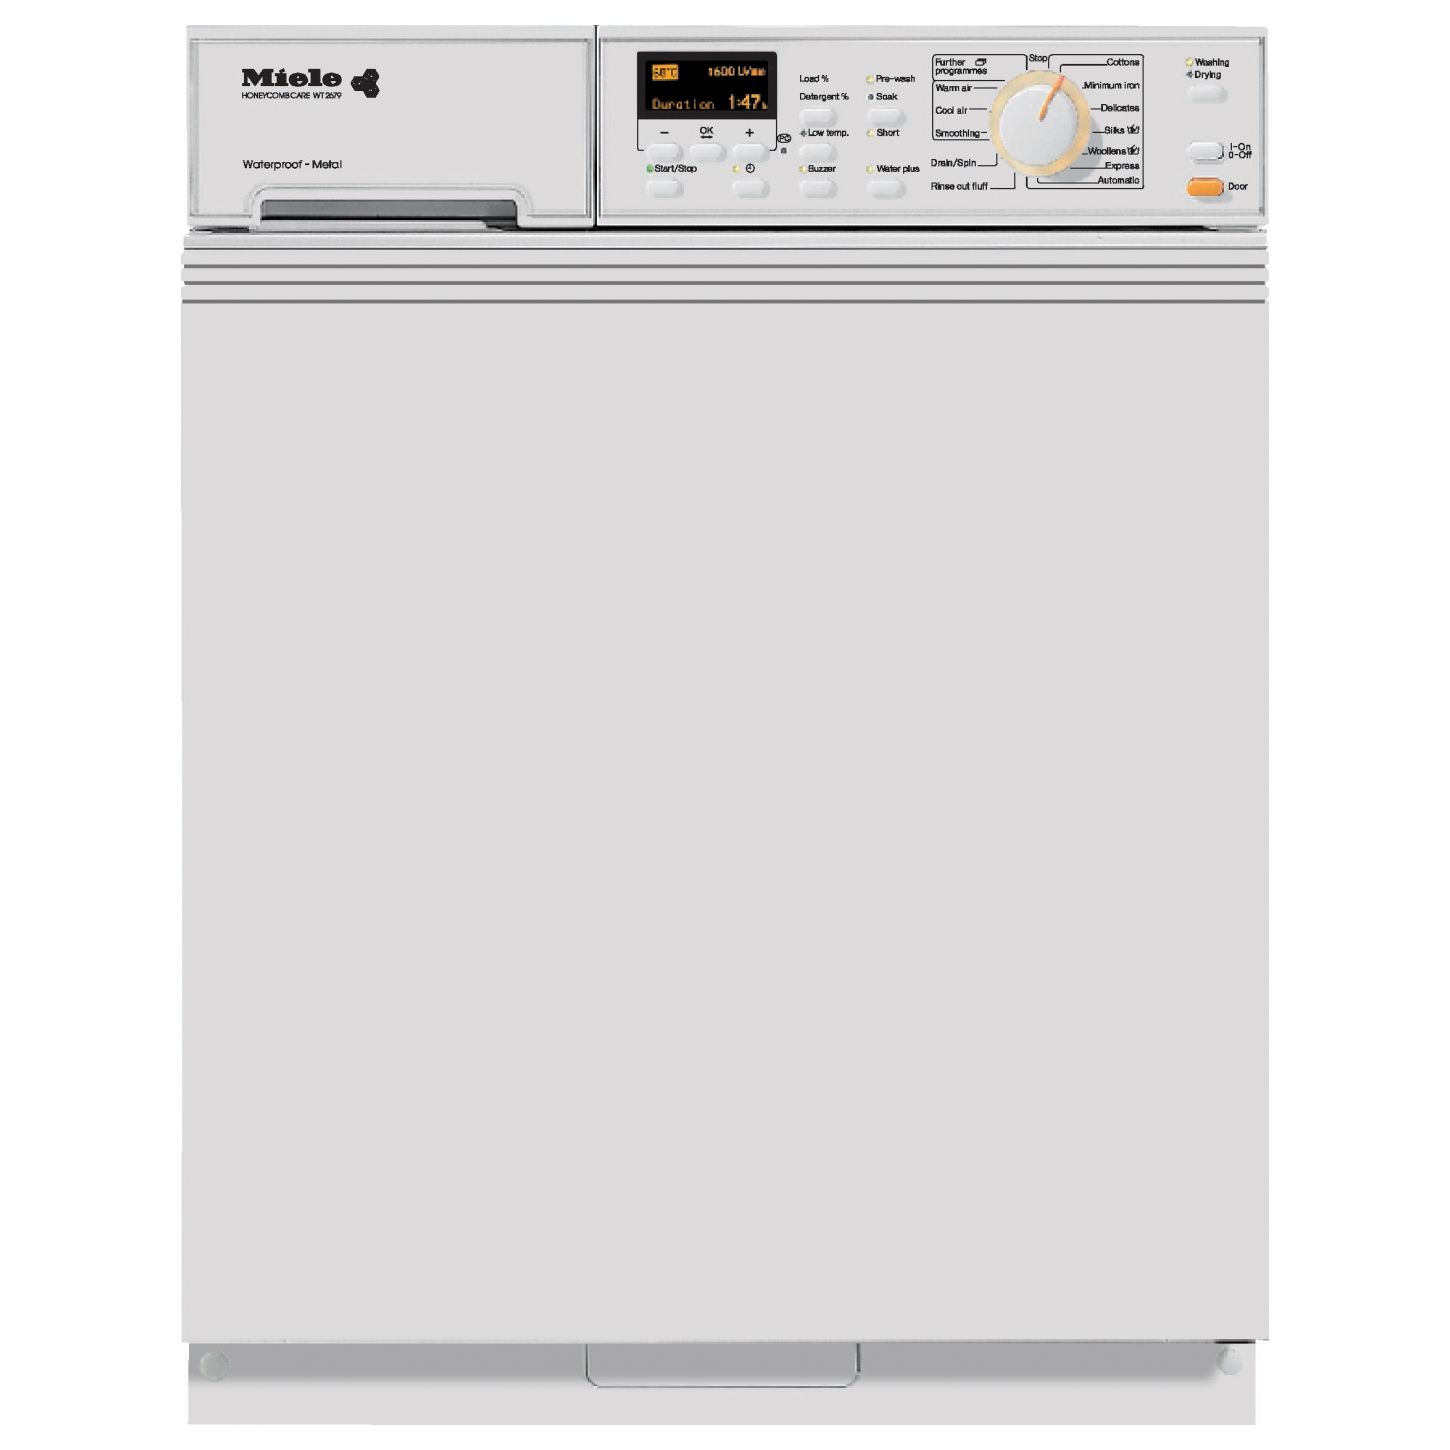 Miele WT2679i WPM Integrated Washer Dryer, White at John Lewis